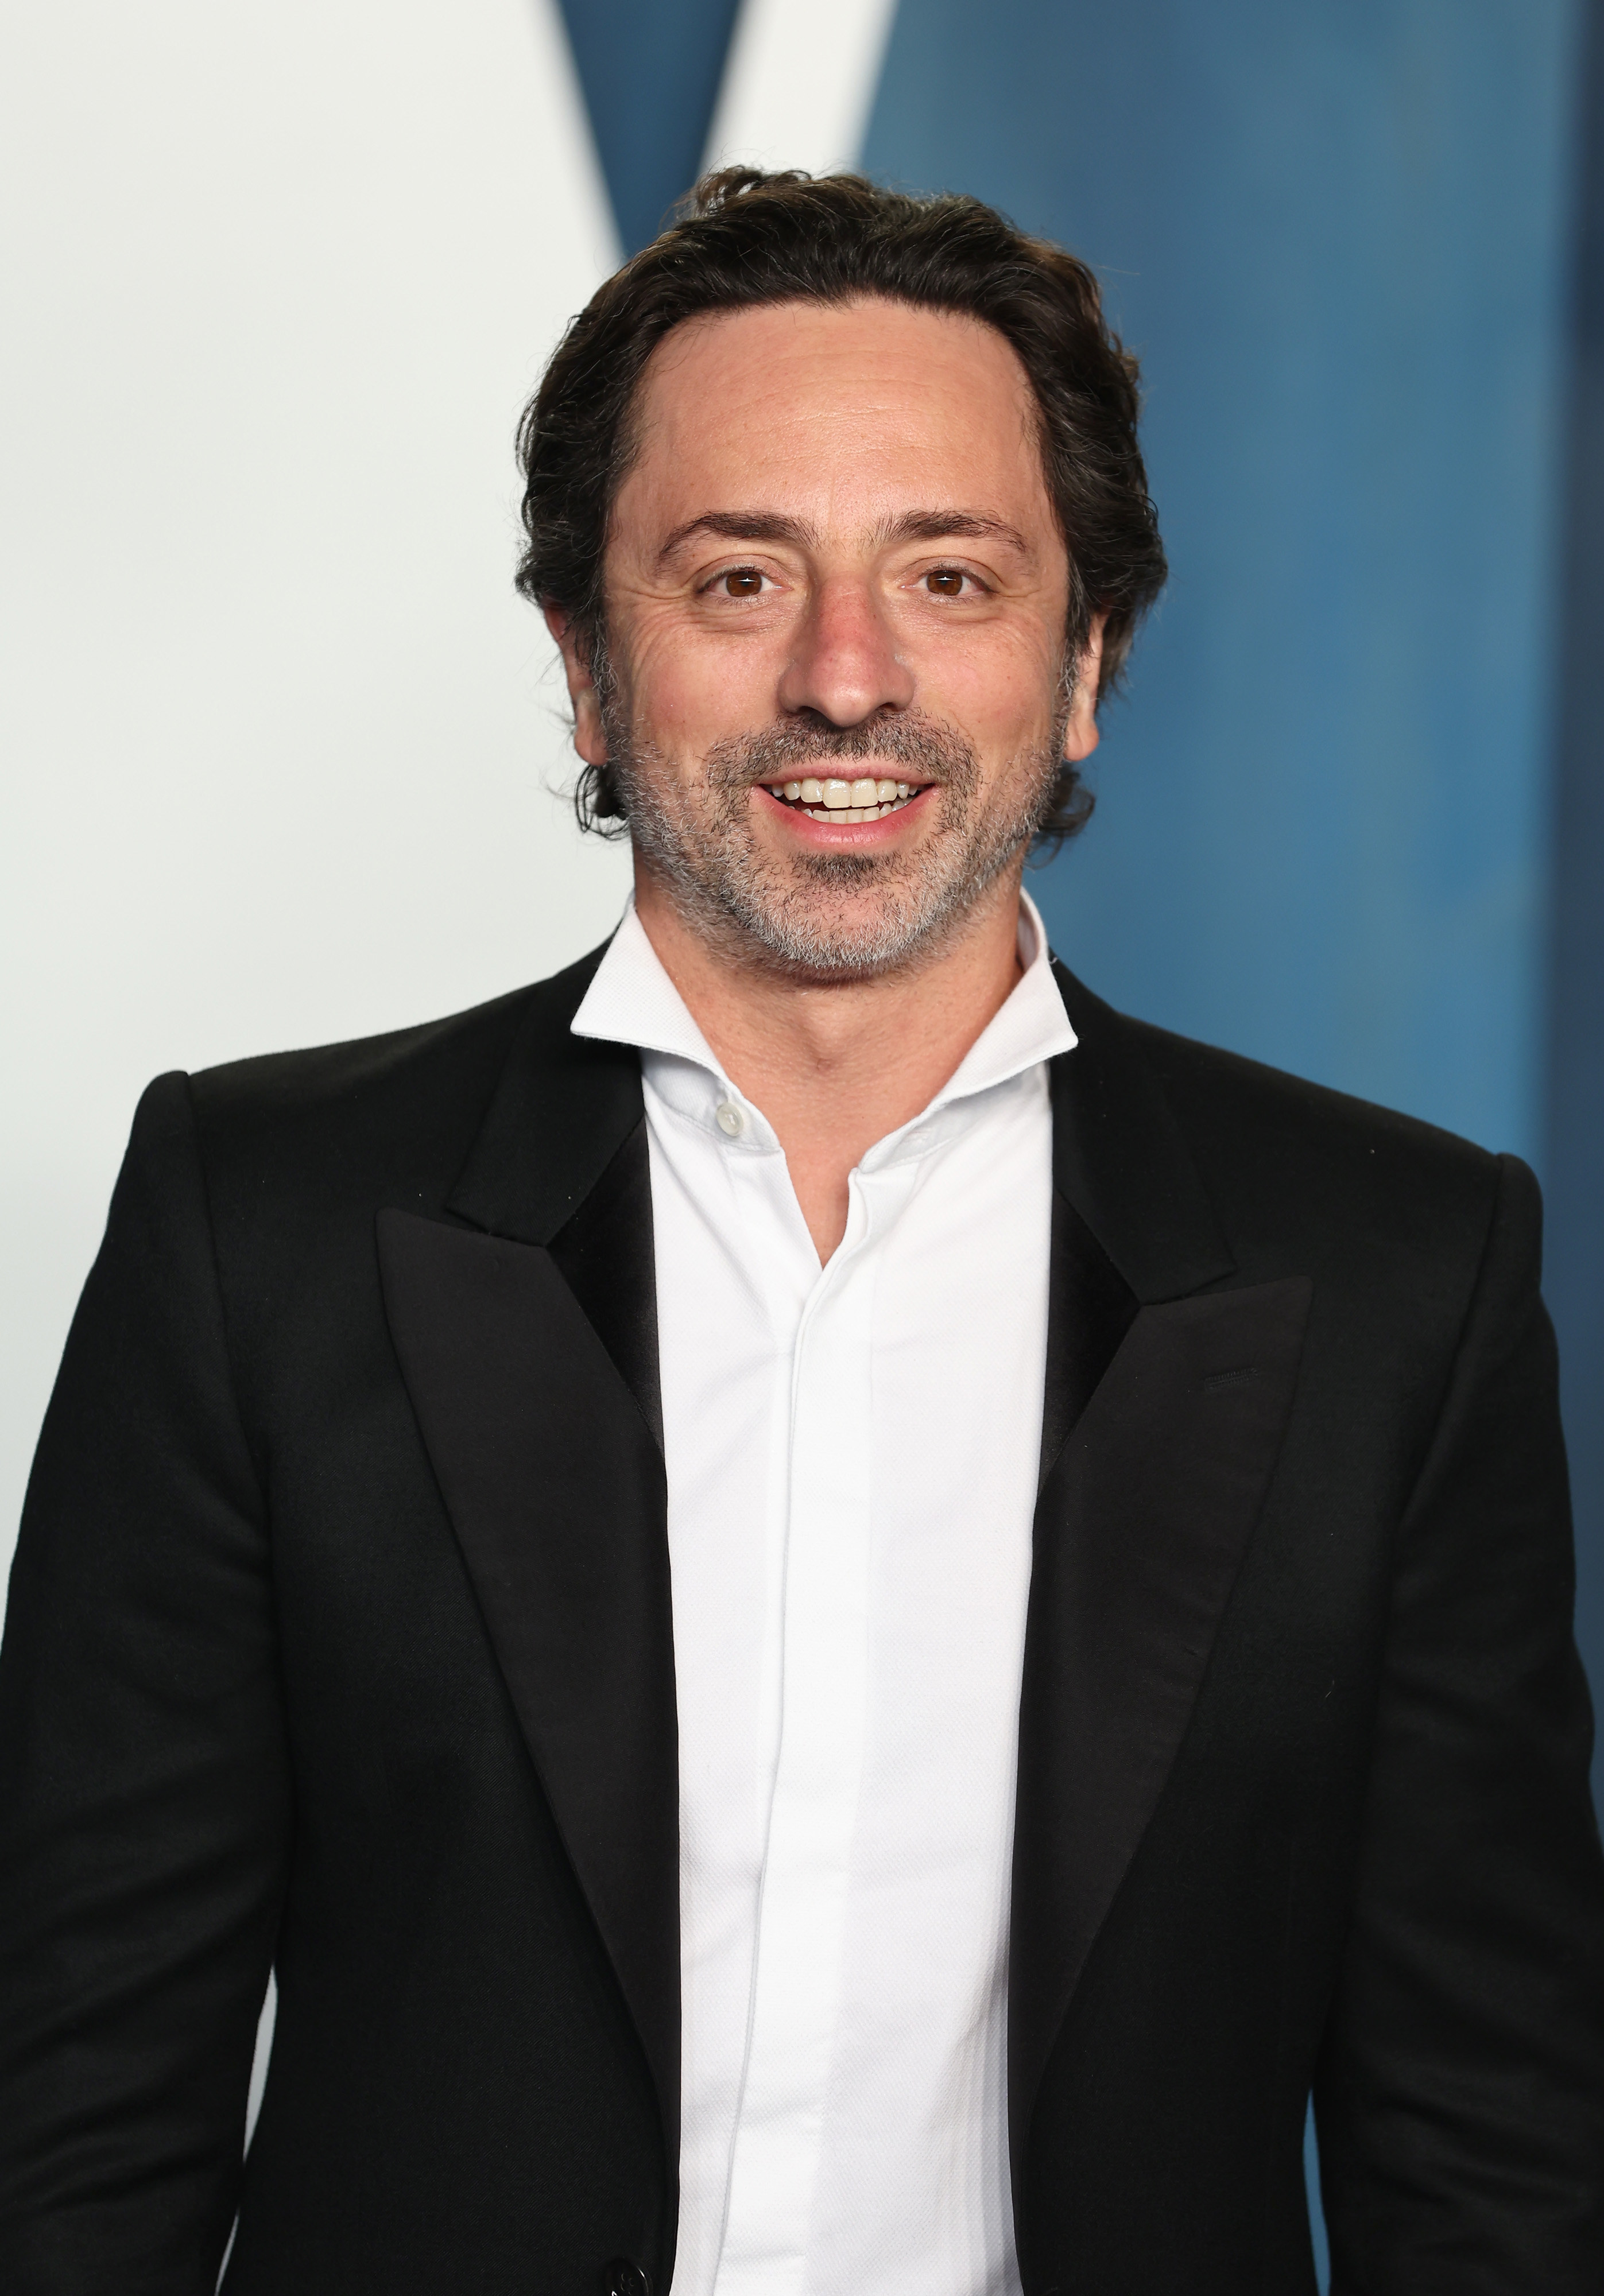 Sergey Brin attends the 2022 Vanity Fair Oscar Party hosted by Radhika Jones at Wallis Annenberg Center for the Performing Arts on March 27, 2022